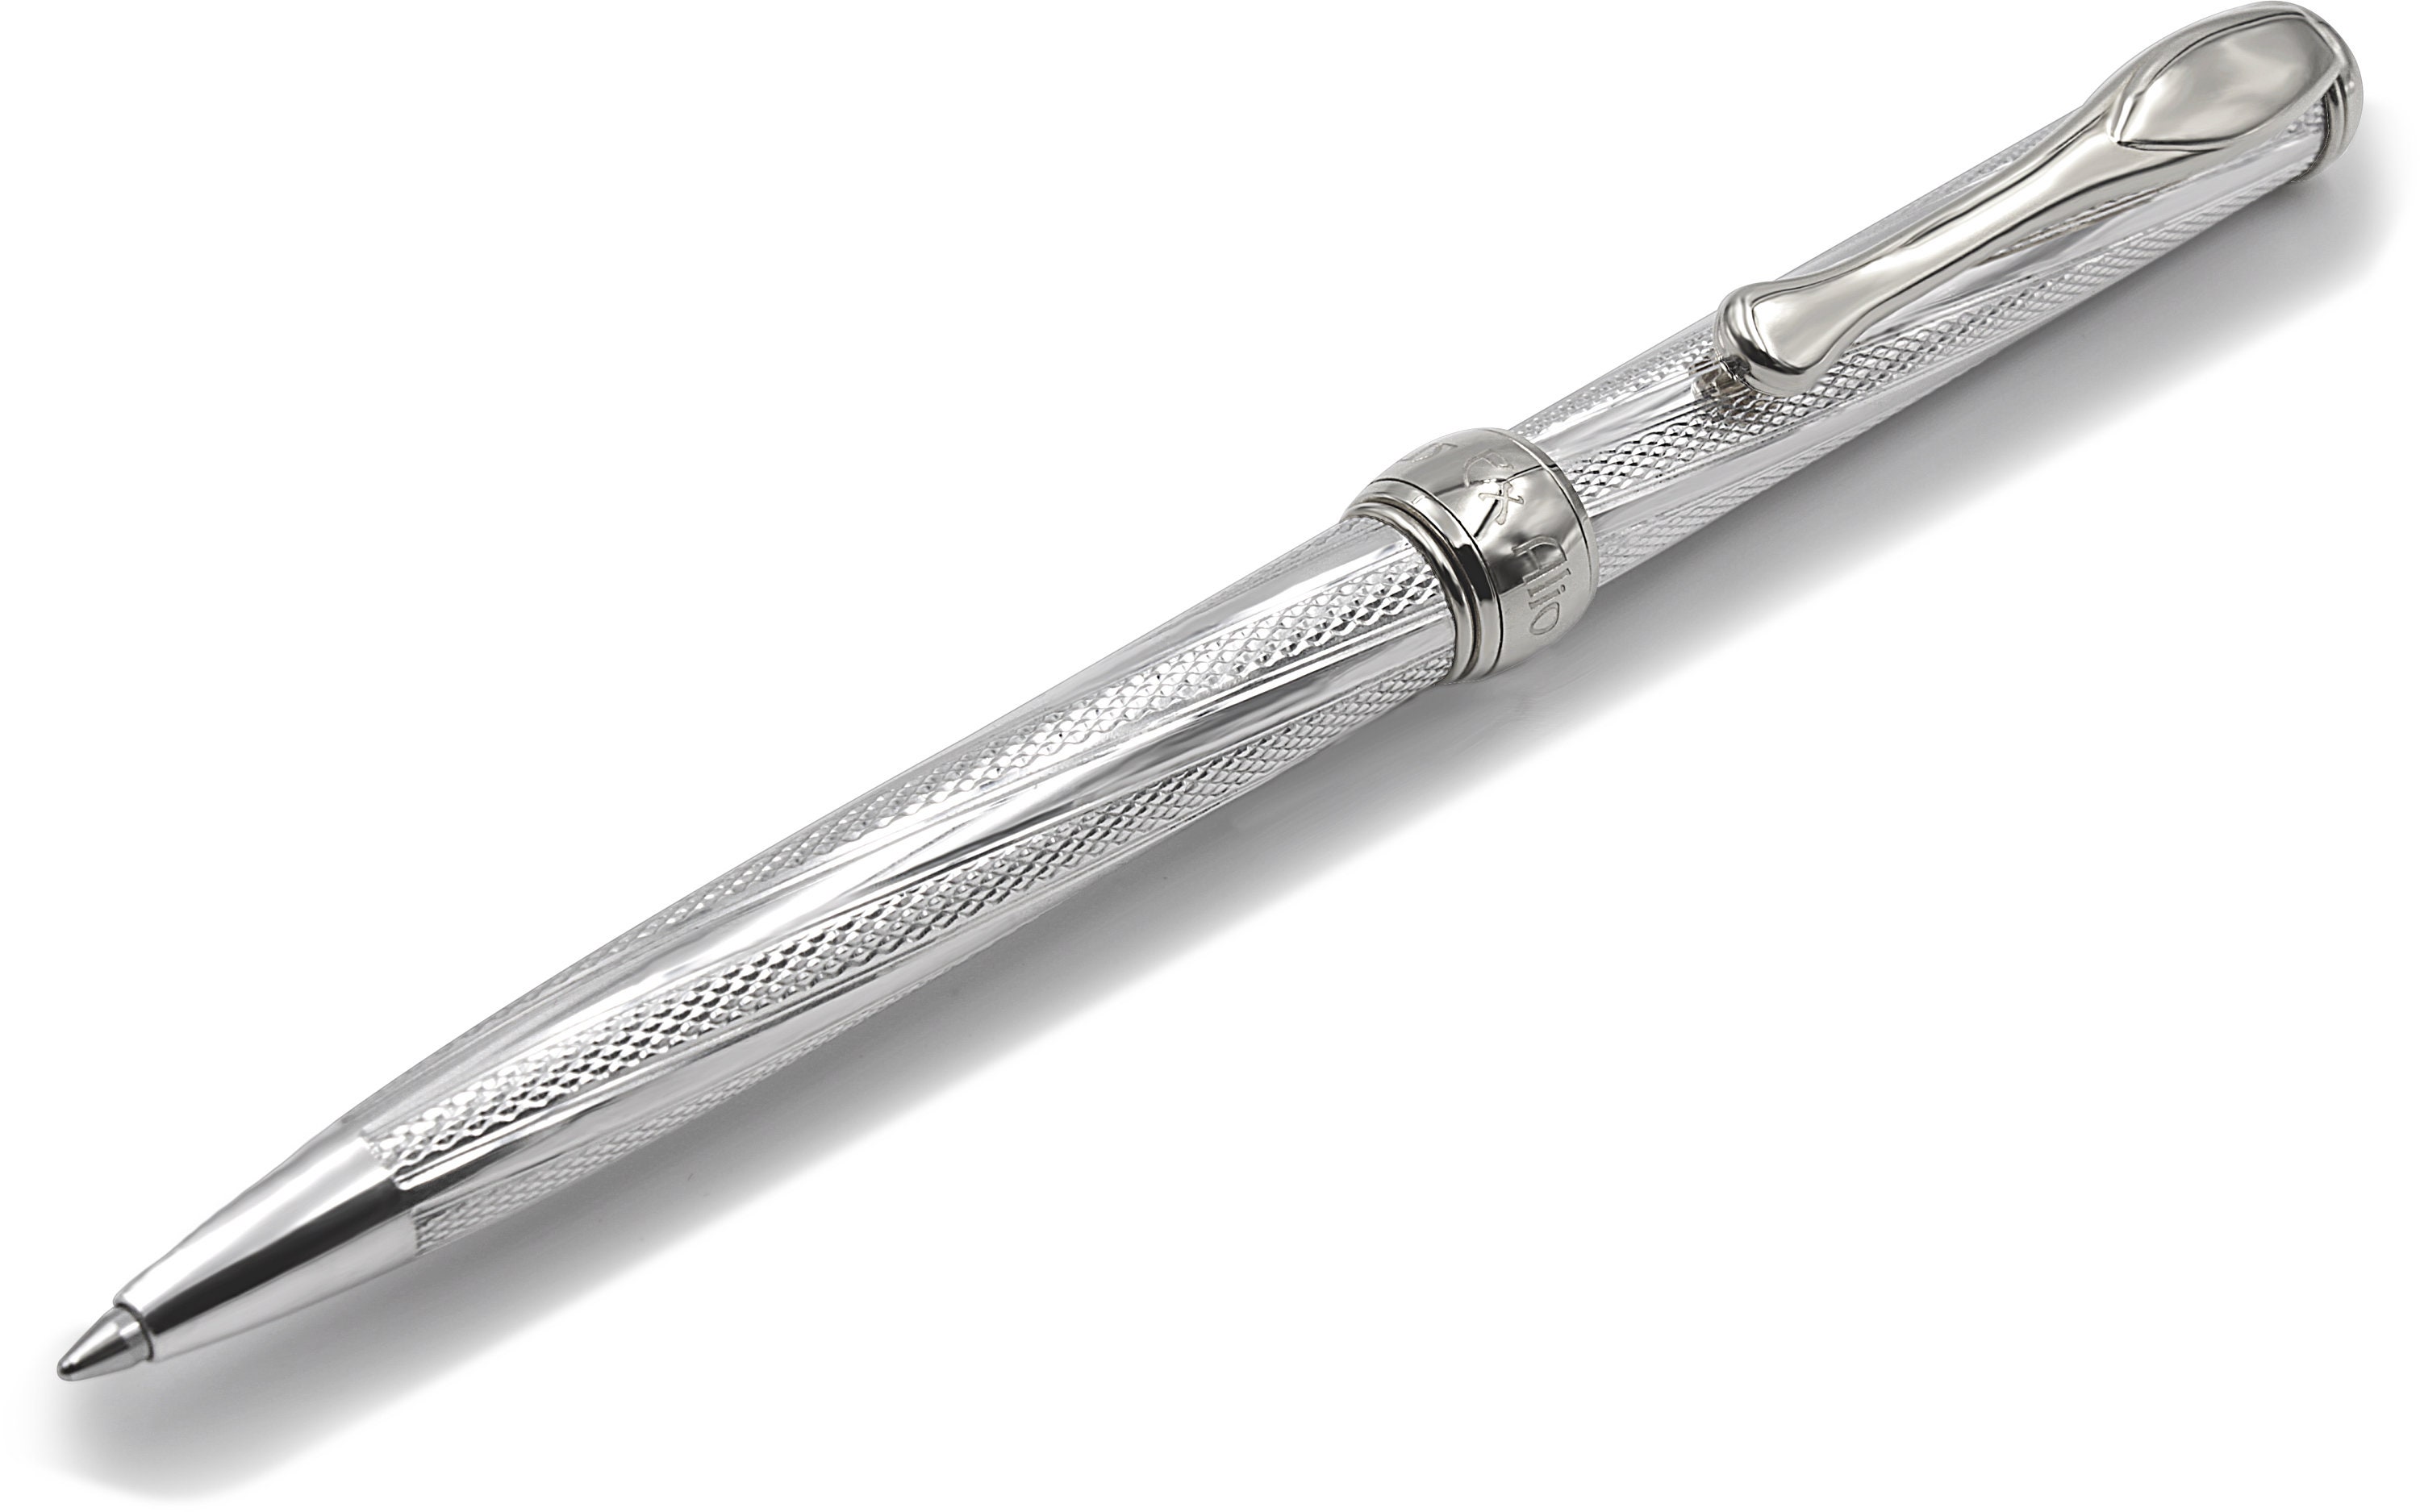 Handcrafted Sterling Silve Ballpoint Pen With Italian Artisans